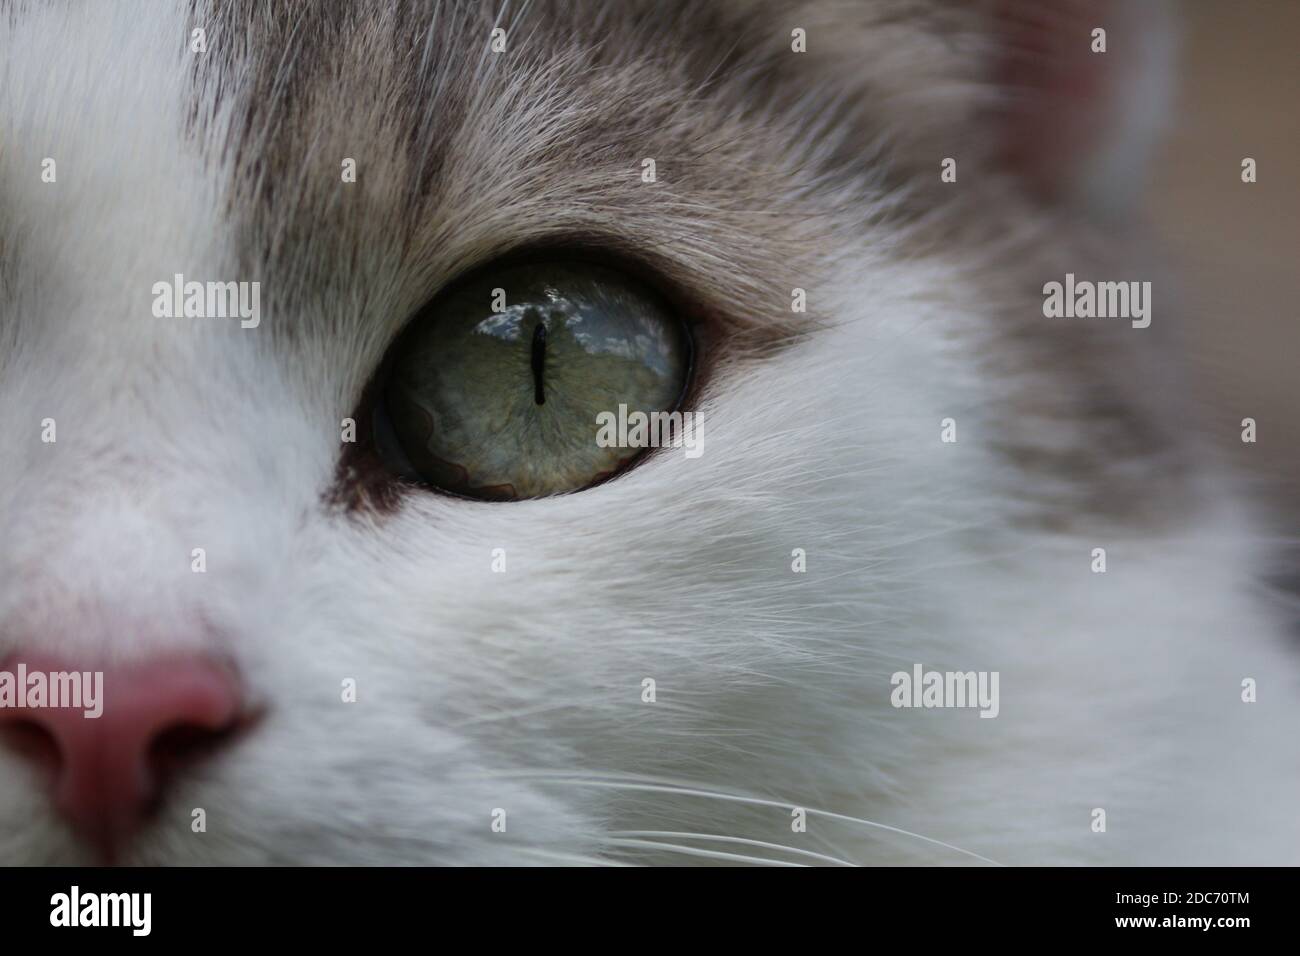 Green cat's eye close up. A gray cat with green eyes and a pink nose. The sky with clouds is reflected in the cat's eye. Stock Photo